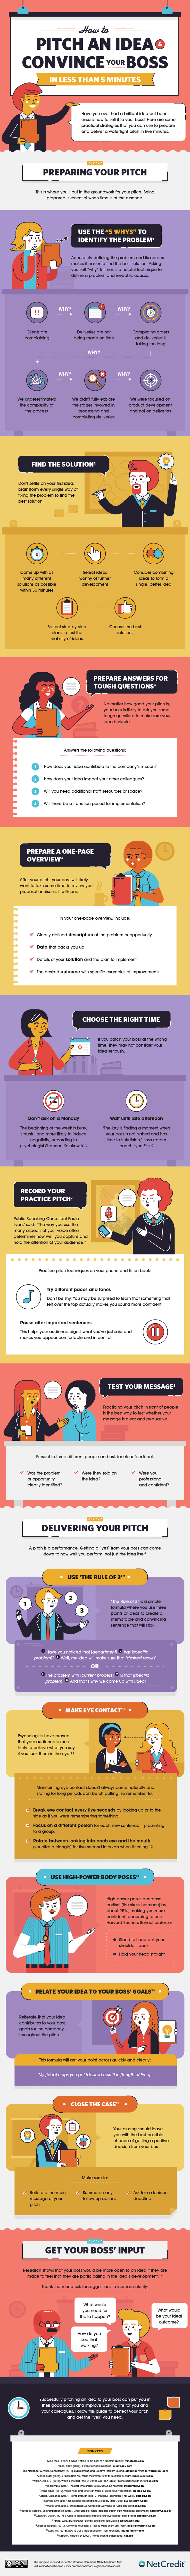 How to Pitch a New Idea to Your Boss - #infographic